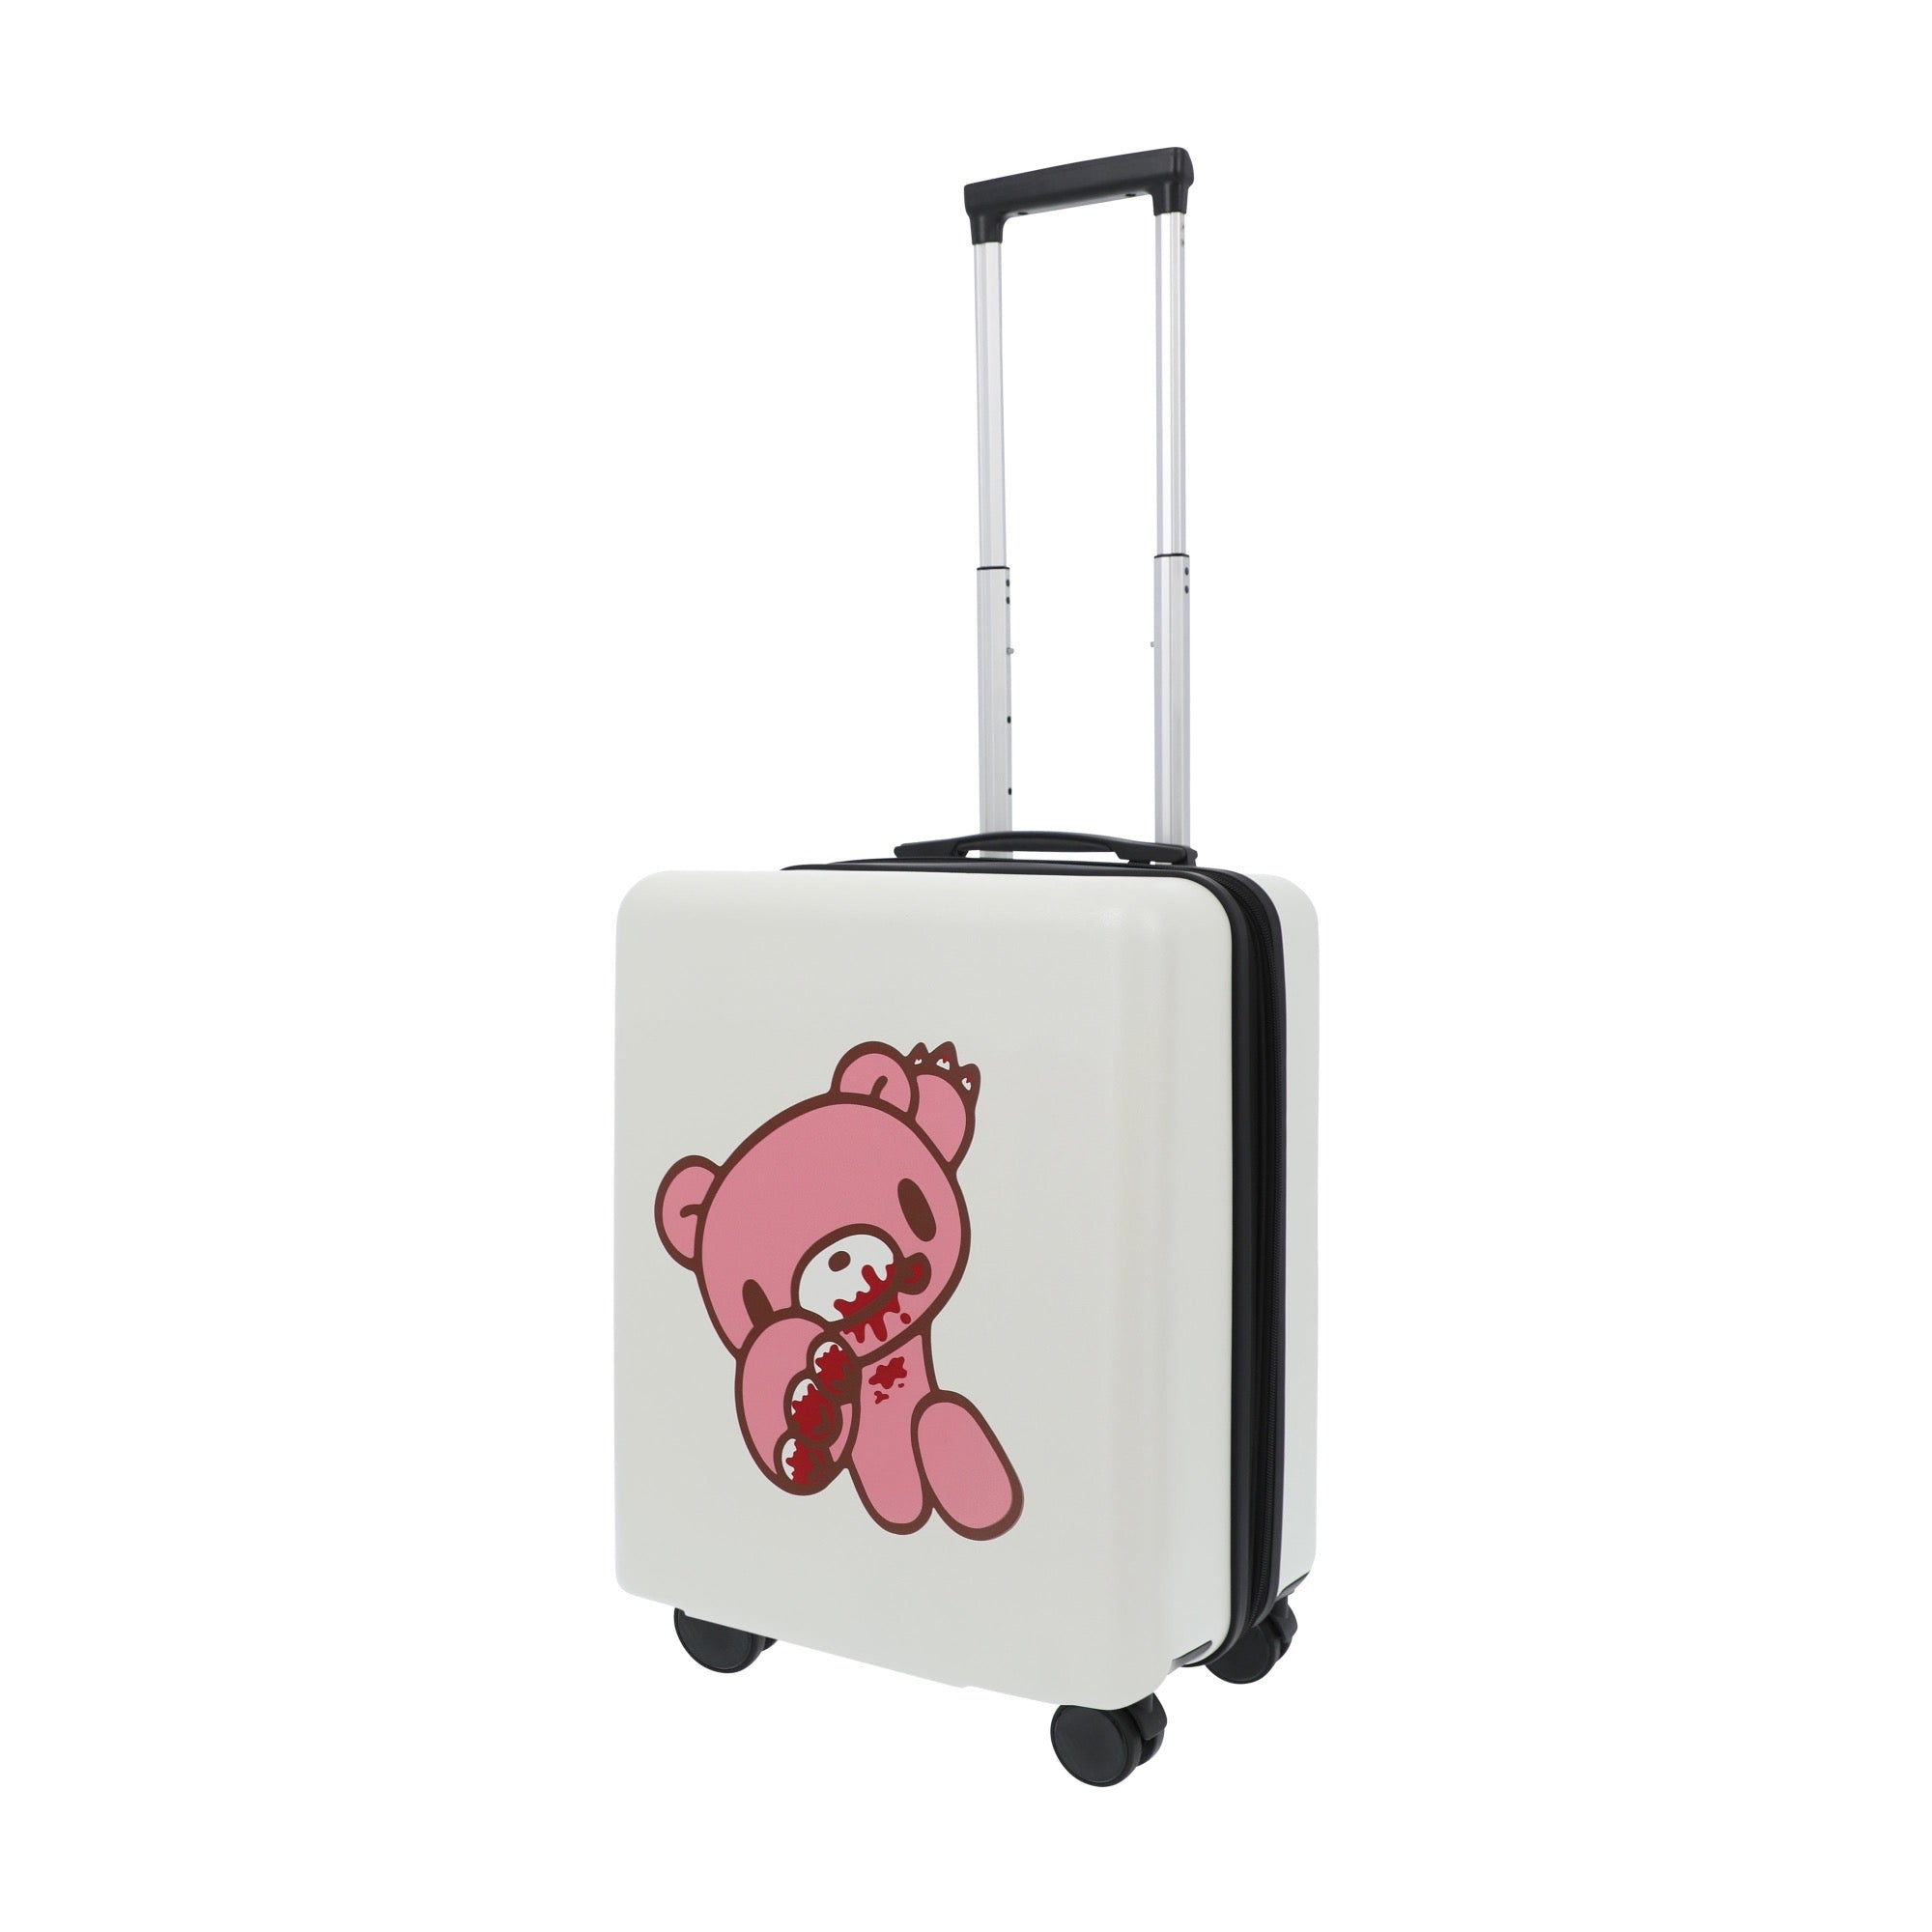 White octas gloomy bear 22.5" carry-on spinner suitcase luggage by Ful